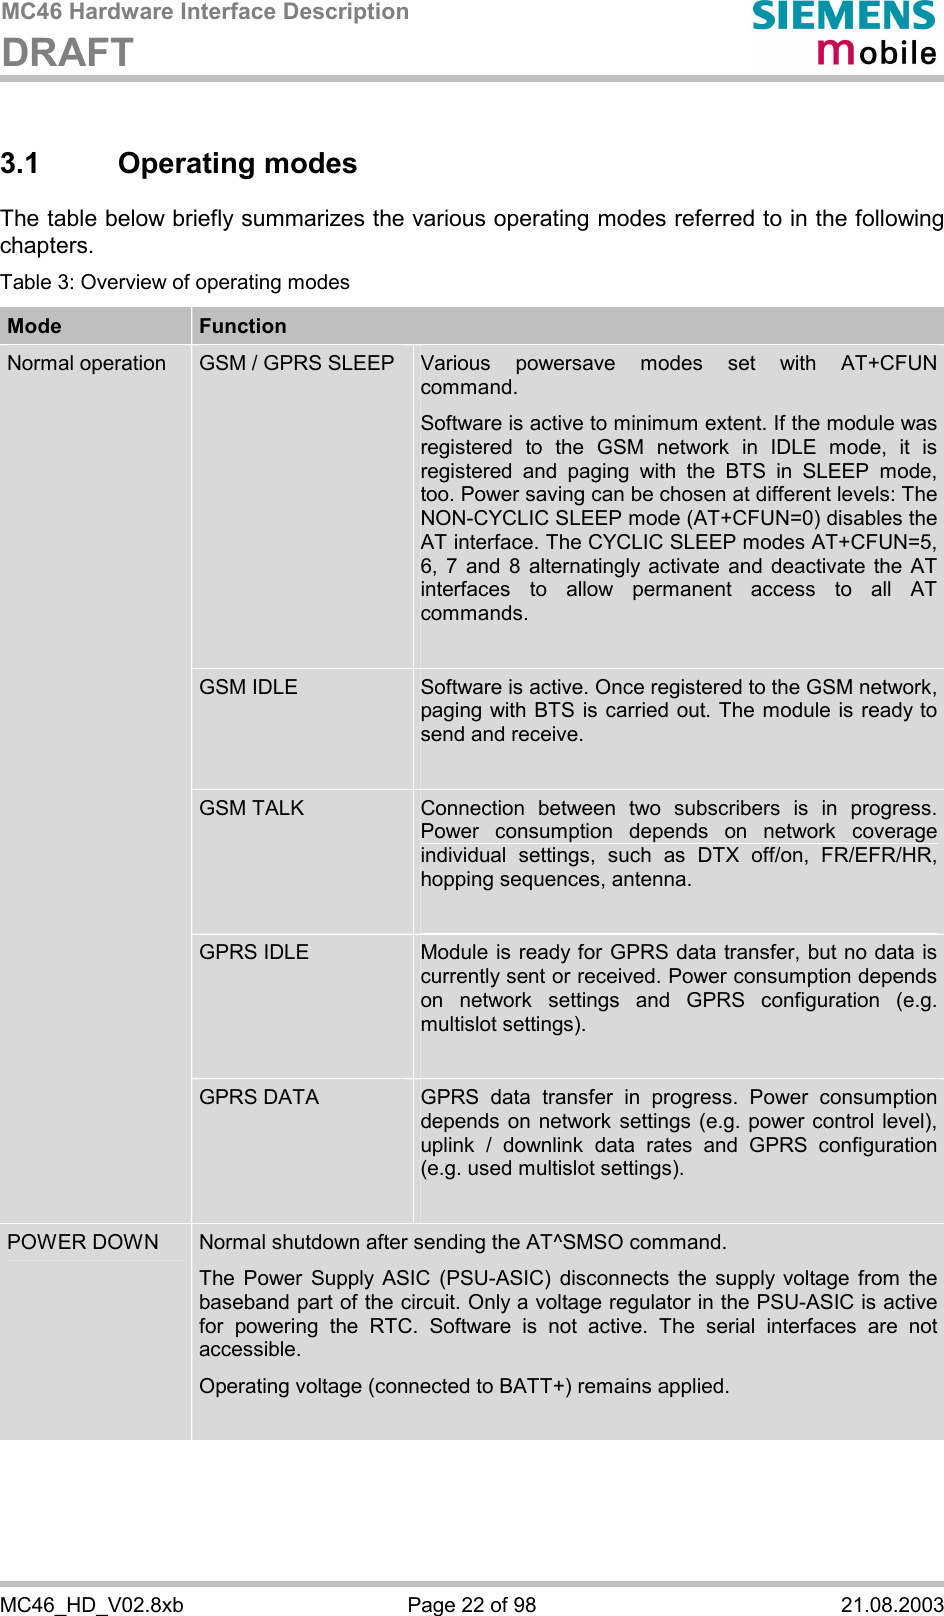 MC46 Hardware Interface Description DRAFT      MC46_HD_V02.8xb  Page 22 of 98  21.08.2003 3.1 Operating modes The table below briefly summarizes the various operating modes referred to in the following chapters.  Table 3: Overview of operating modes Mode  Function GSM / GPRS SLEEP  Various powersave modes set with AT+CFUN command.  Software is active to minimum extent. If the module was registered to the GSM network in IDLE mode, it is registered and paging with the BTS in SLEEP mode, too. Power saving can be chosen at different levels: The NON-CYCLIC SLEEP mode (AT+CFUN=0) disables the AT interface. The CYCLIC SLEEP modes AT+CFUN=5, 6, 7 and 8 alternatingly activate and deactivate the AT interfaces to allow permanent access to all AT commands.  GSM IDLE  Software is active. Once registered to the GSM network, paging with BTS is carried out. The module is ready to send and receive.  GSM TALK  Connection between two subscribers is in progress. Power consumption depends on network coverage individual settings, such as DTX off/on, FR/EFR/HR, hopping sequences, antenna.  GPRS IDLE  Module is ready for GPRS data transfer, but no data is currently sent or received. Power consumption depends on network settings and GPRS configuration (e.g. multislot settings).  Normal operation GPRS DATA  GPRS data transfer in progress. Power consumption depends on network settings (e.g. power control level), uplink / downlink data rates and GPRS configuration (e.g. used multislot settings).  POWER DOWN  Normal shutdown after sending the AT^SMSO command.  The Power Supply ASIC (PSU-ASIC) disconnects the supply voltage from the baseband part of the circuit. Only a voltage regulator in the PSU-ASIC is active for powering the RTC. Software is not active. The serial interfaces are not accessible.  Operating voltage (connected to BATT+) remains applied.  